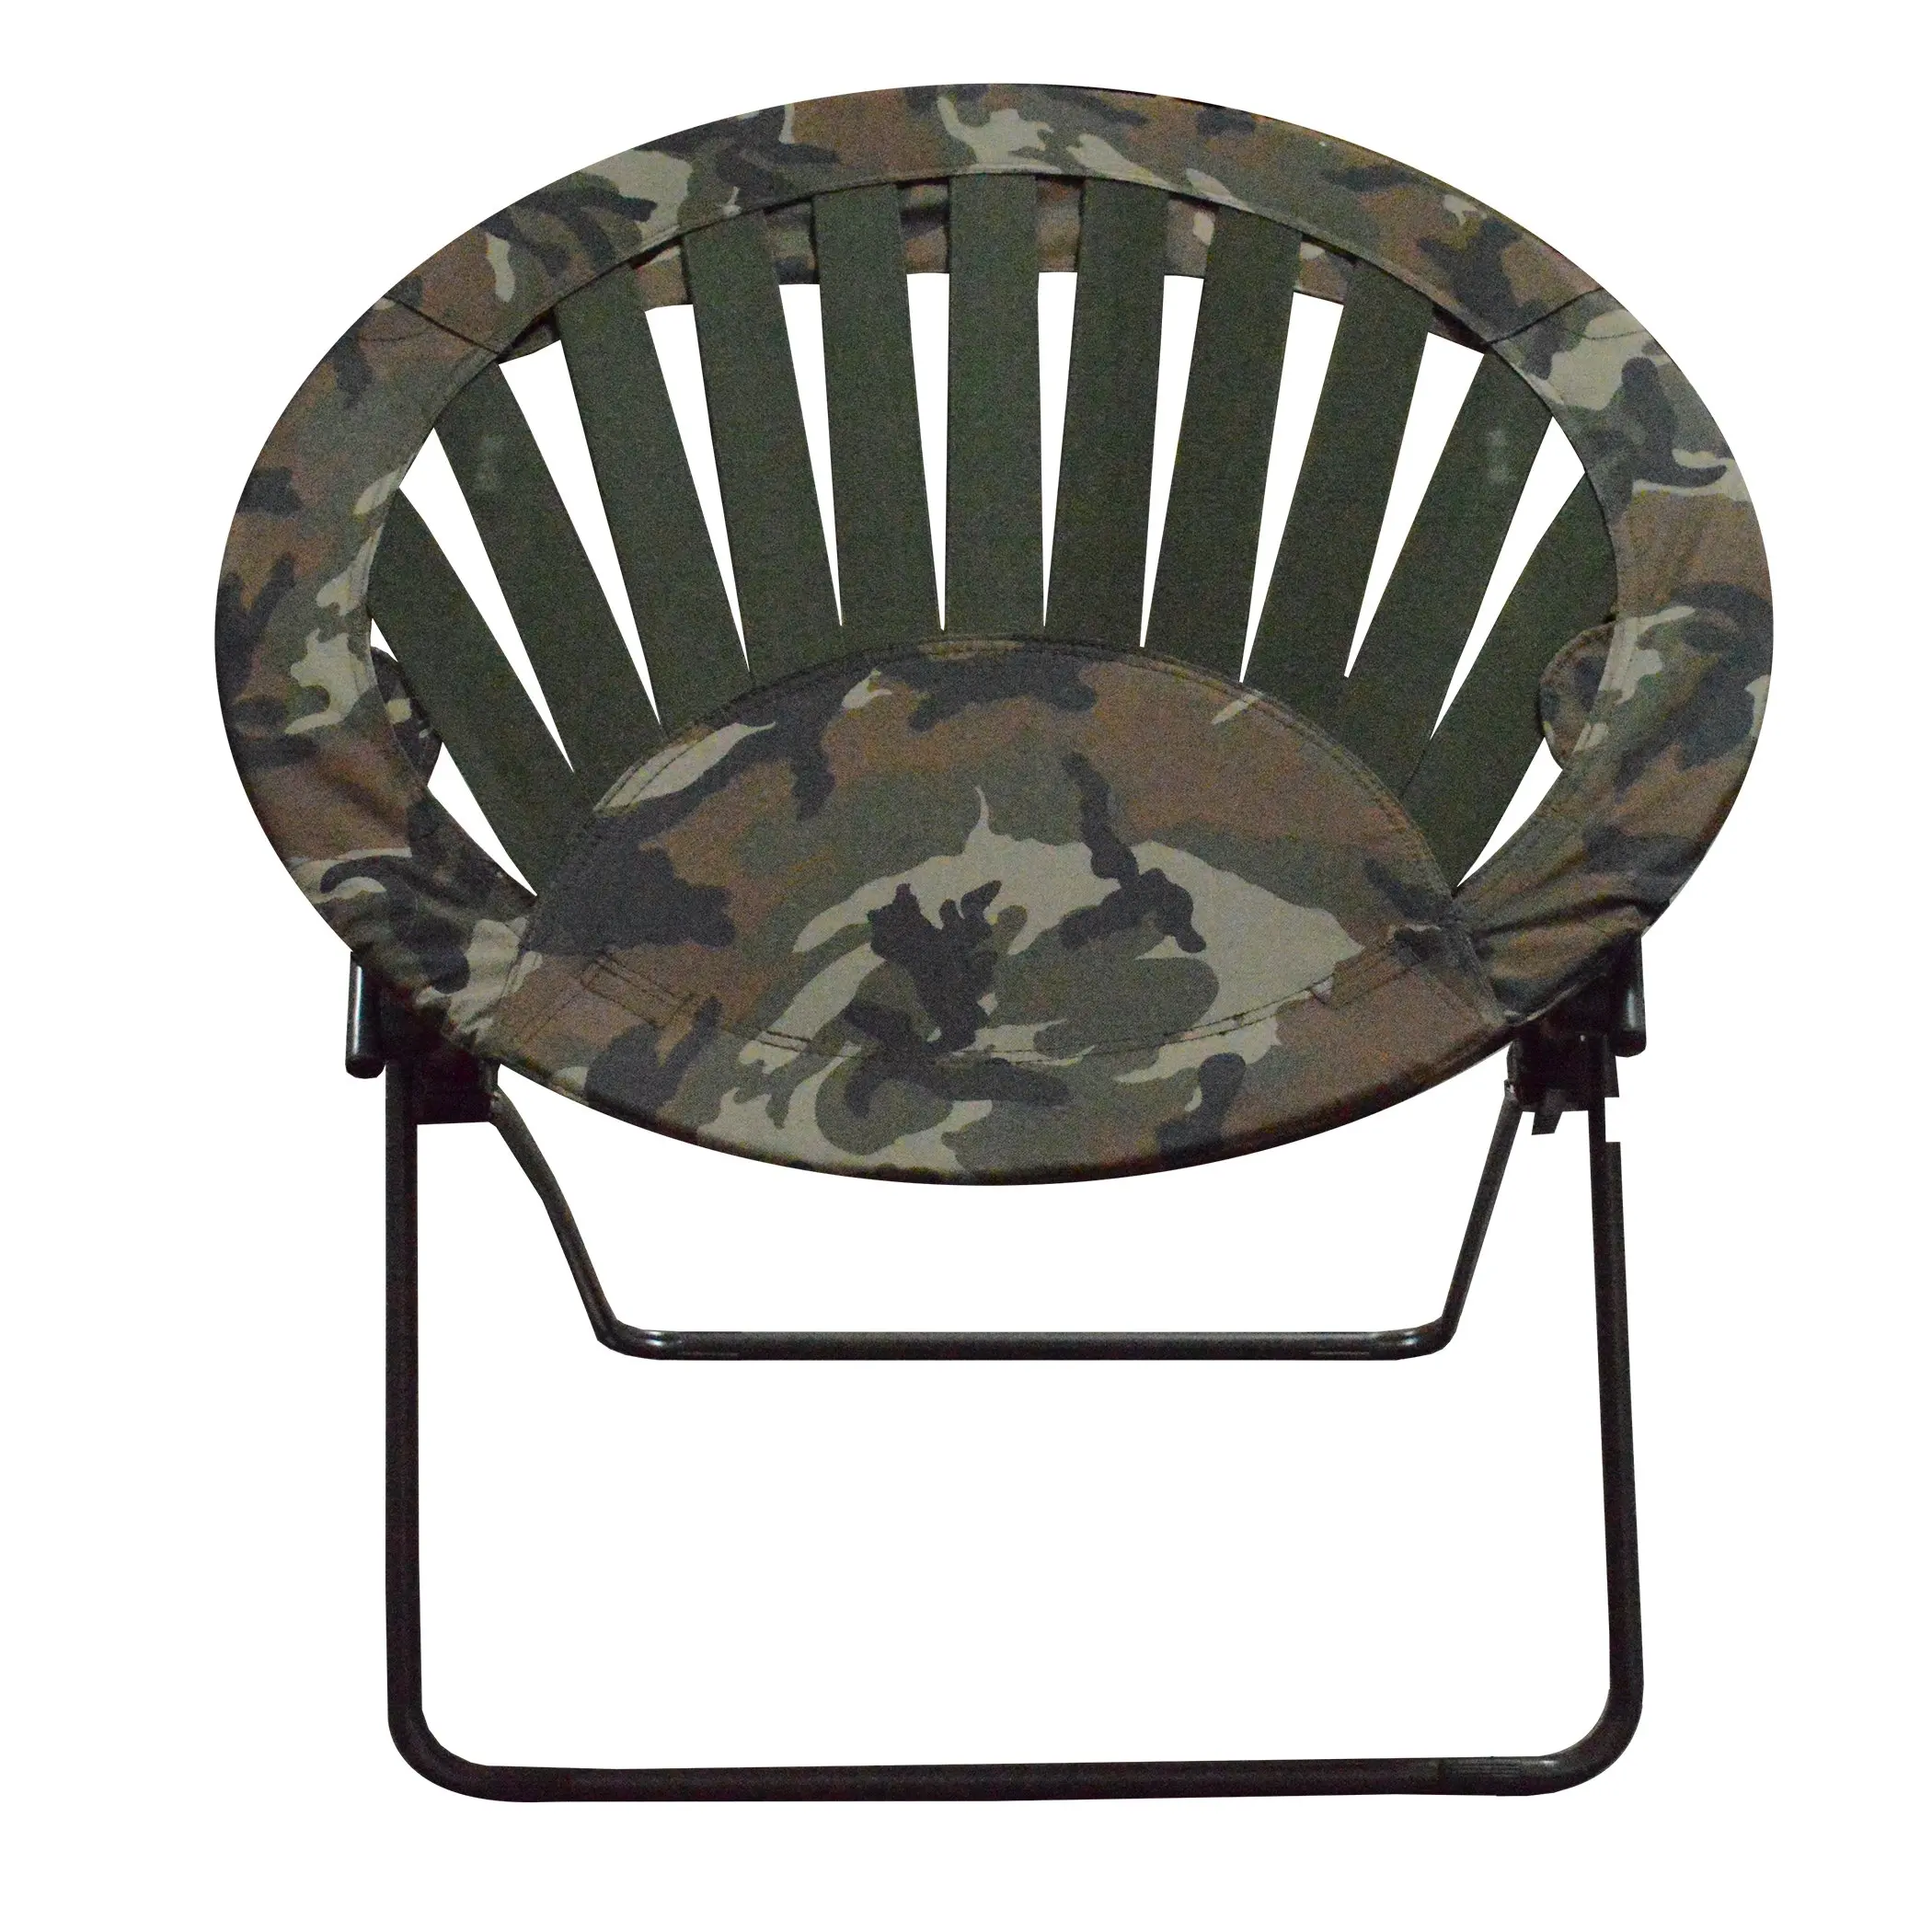 Cheap Loyal Bungee Chair Find Loyal Bungee Chair Deals On Line At